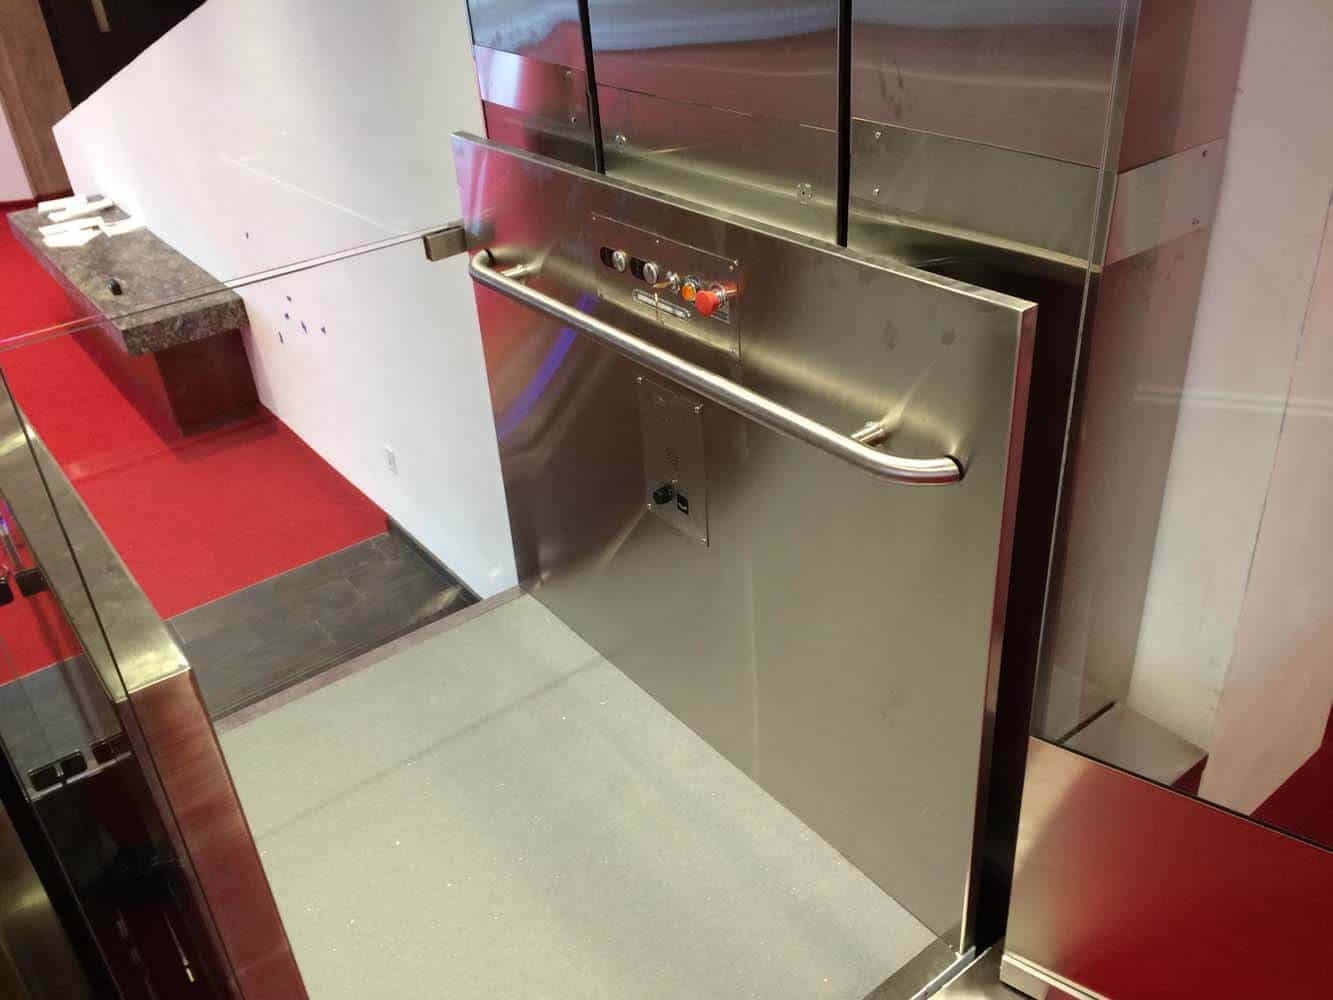 ada-compliant inclined platform lift in stainless steel finish with handrail